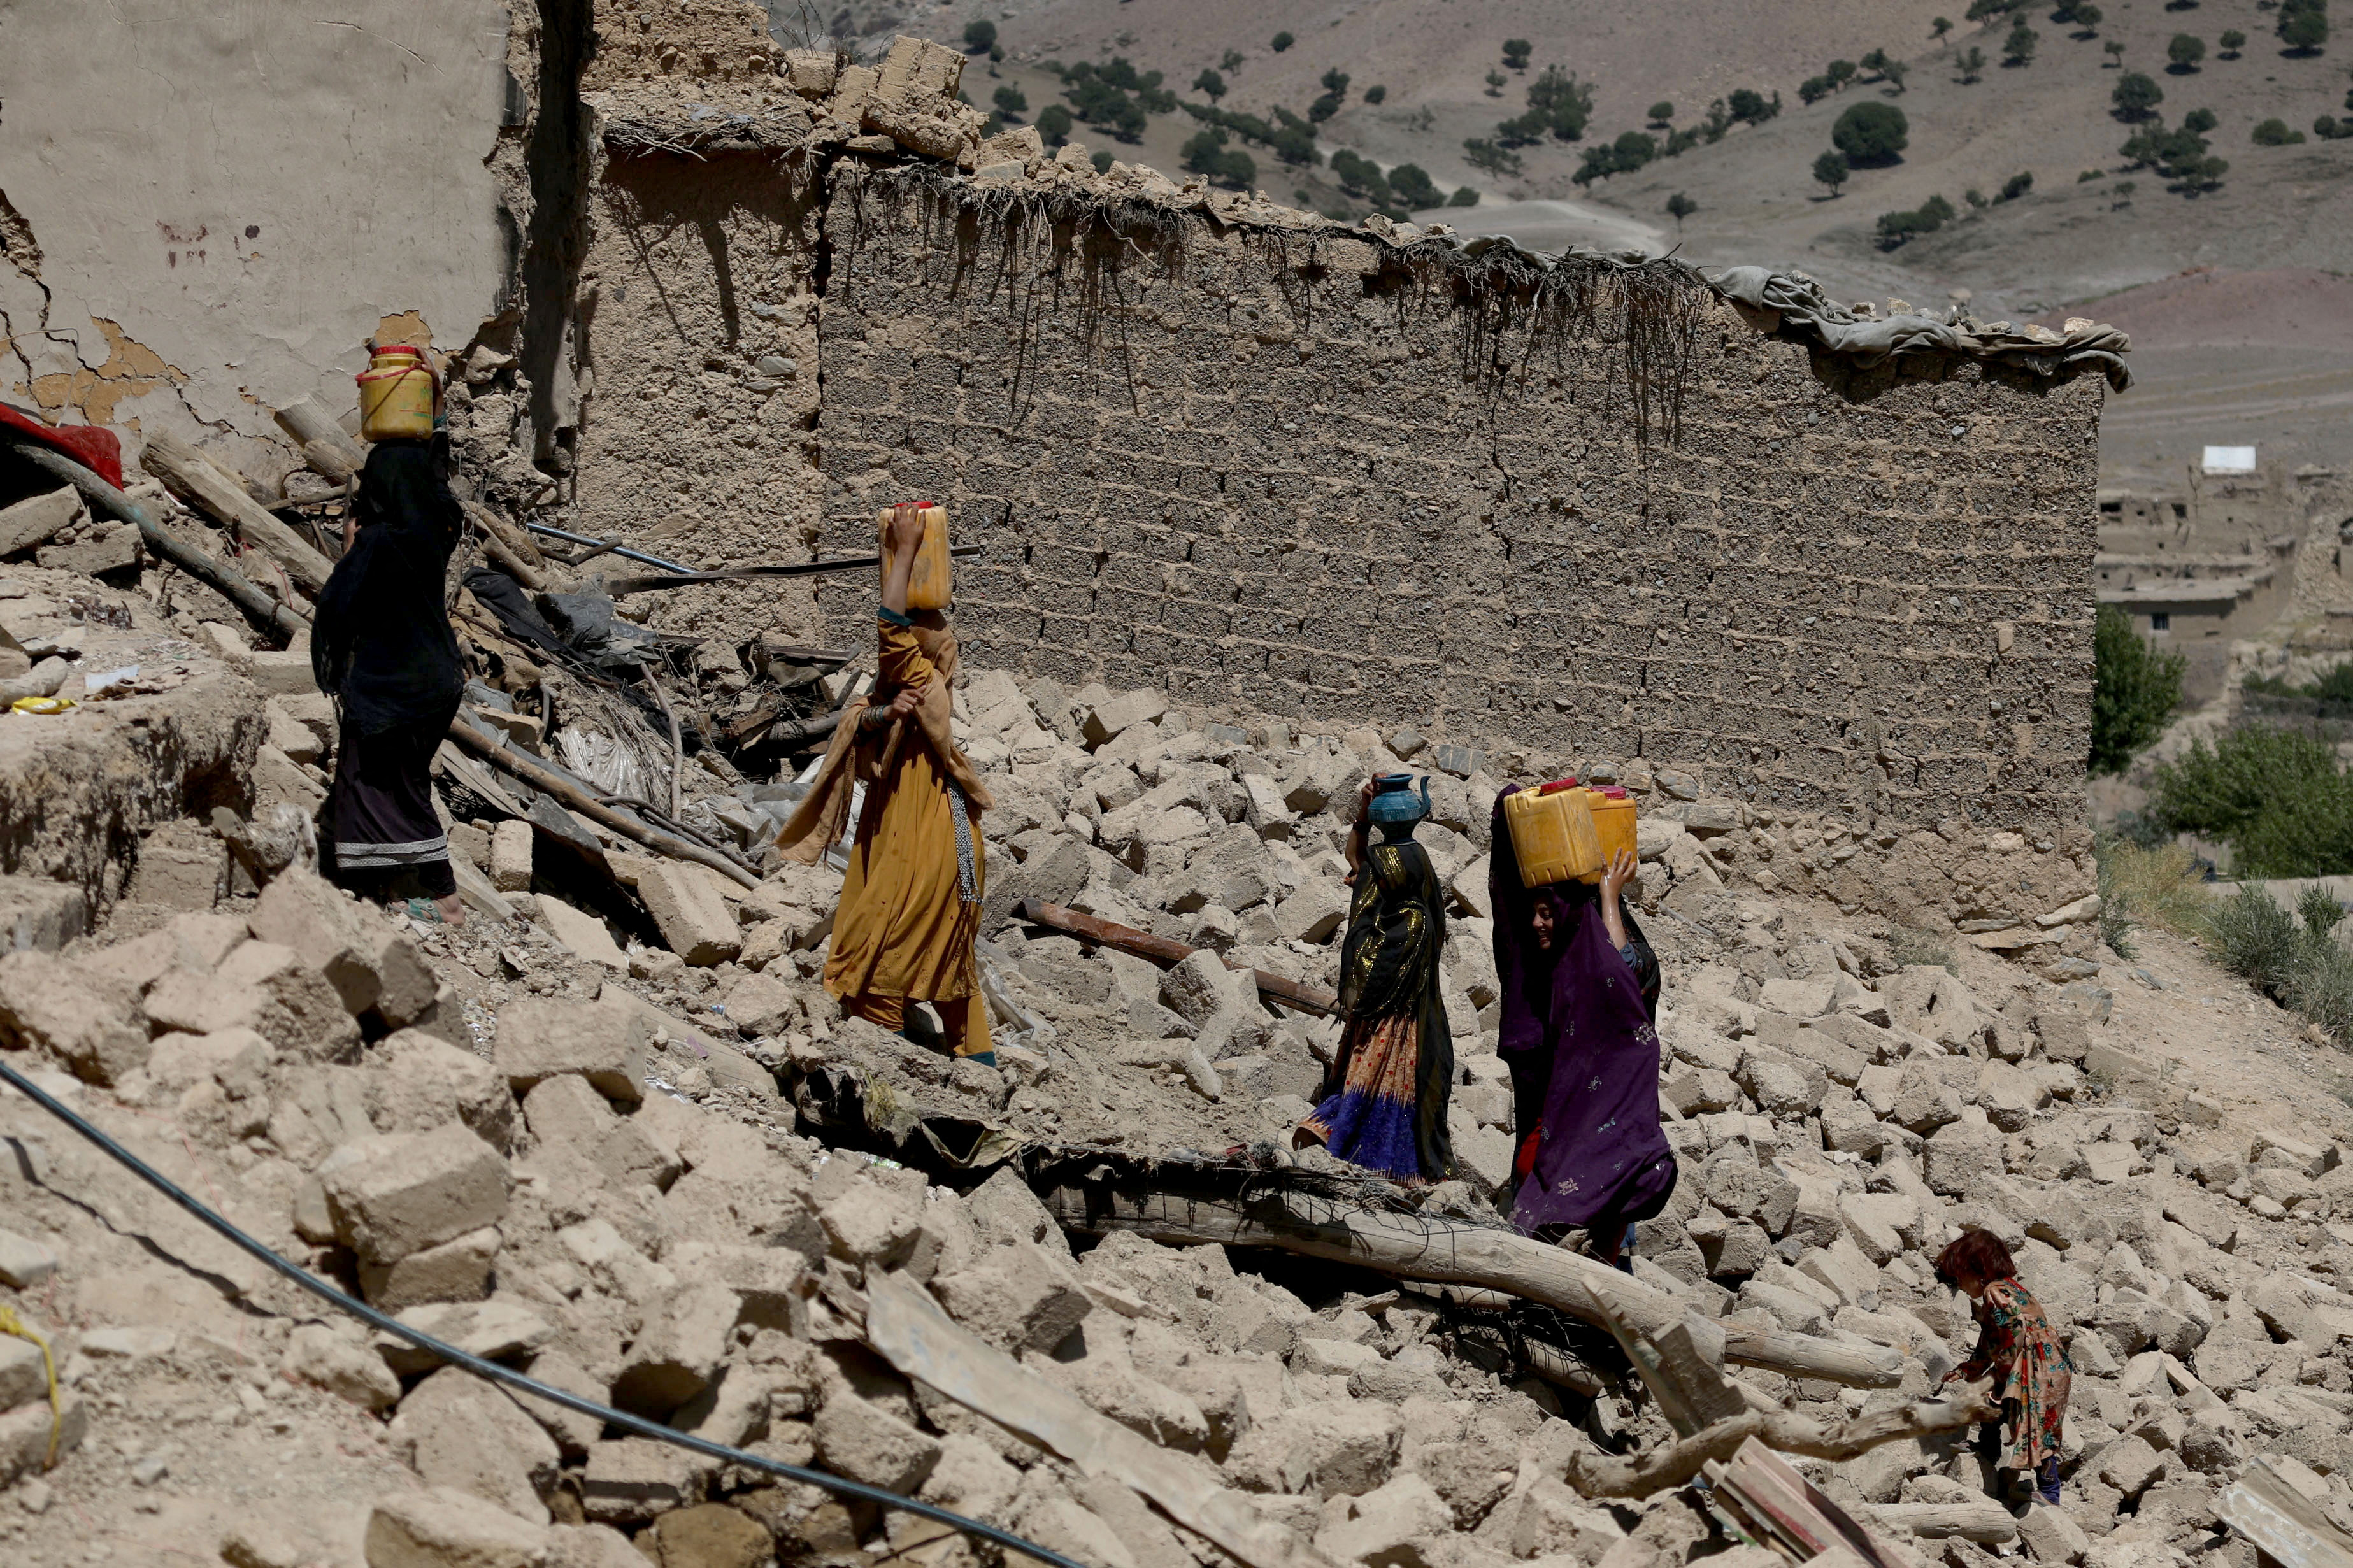 Taliban Calls for End to Sanctions and Release of Frozen Funds After Deadly Earthquake